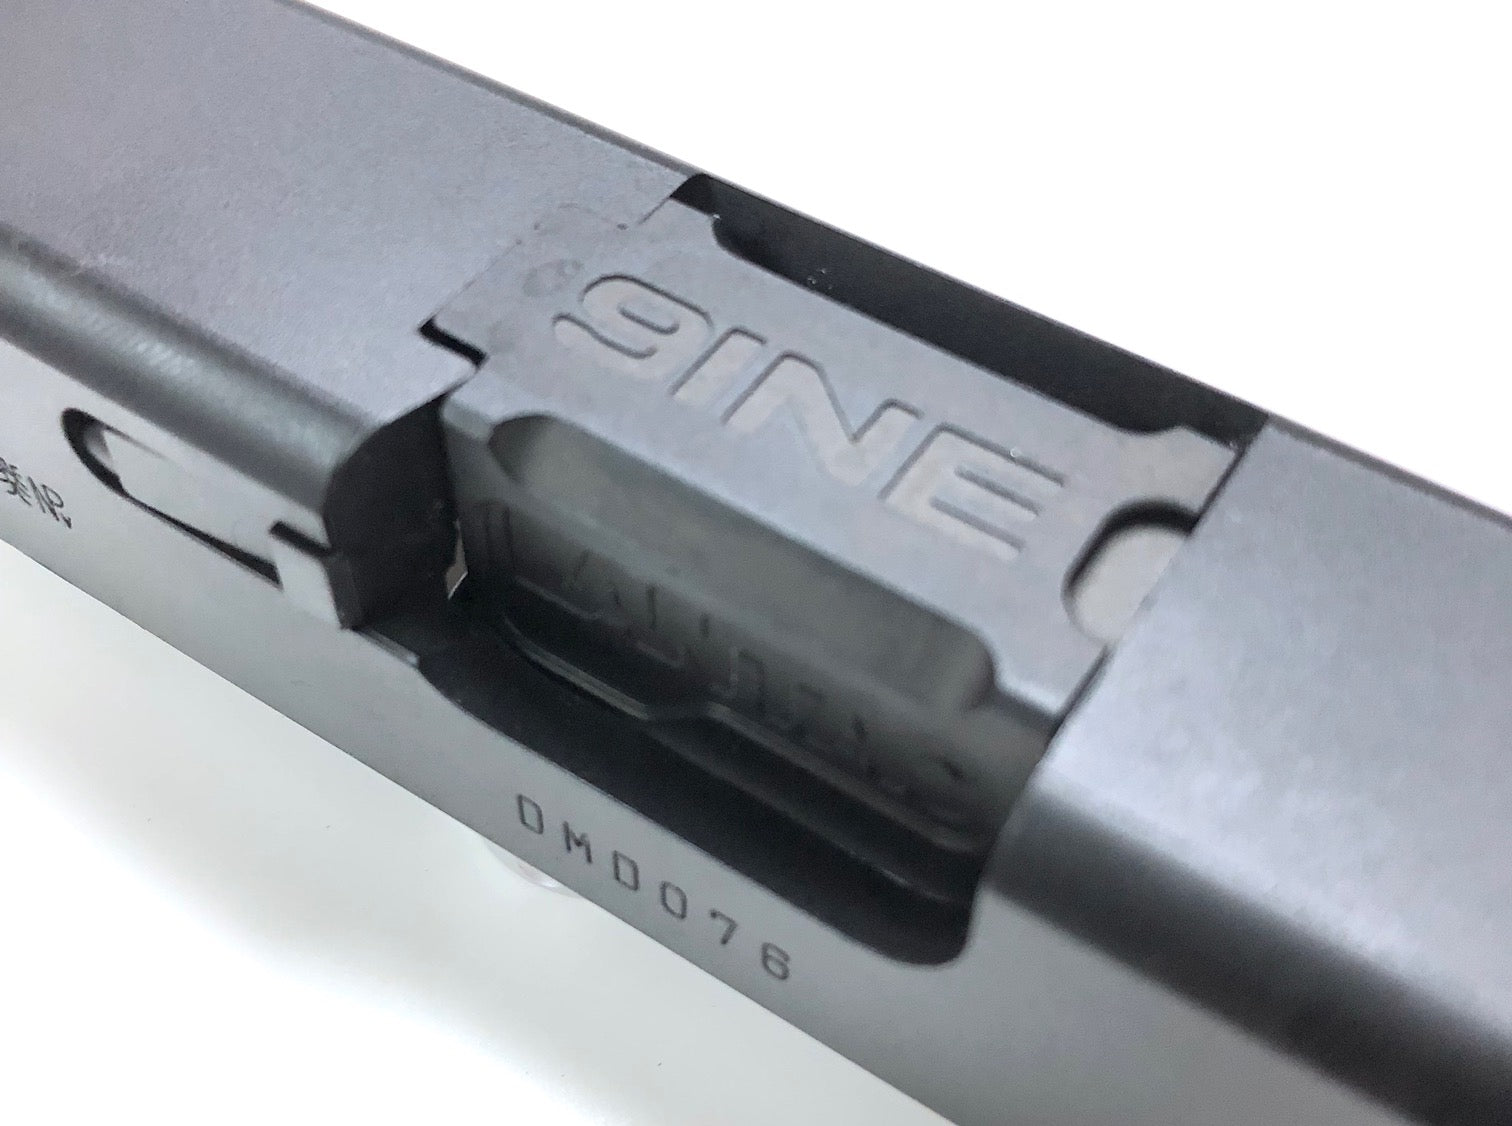 5KU 9INE Type Threaded Outer Barrel For Marui G-Series GBB #GB-449